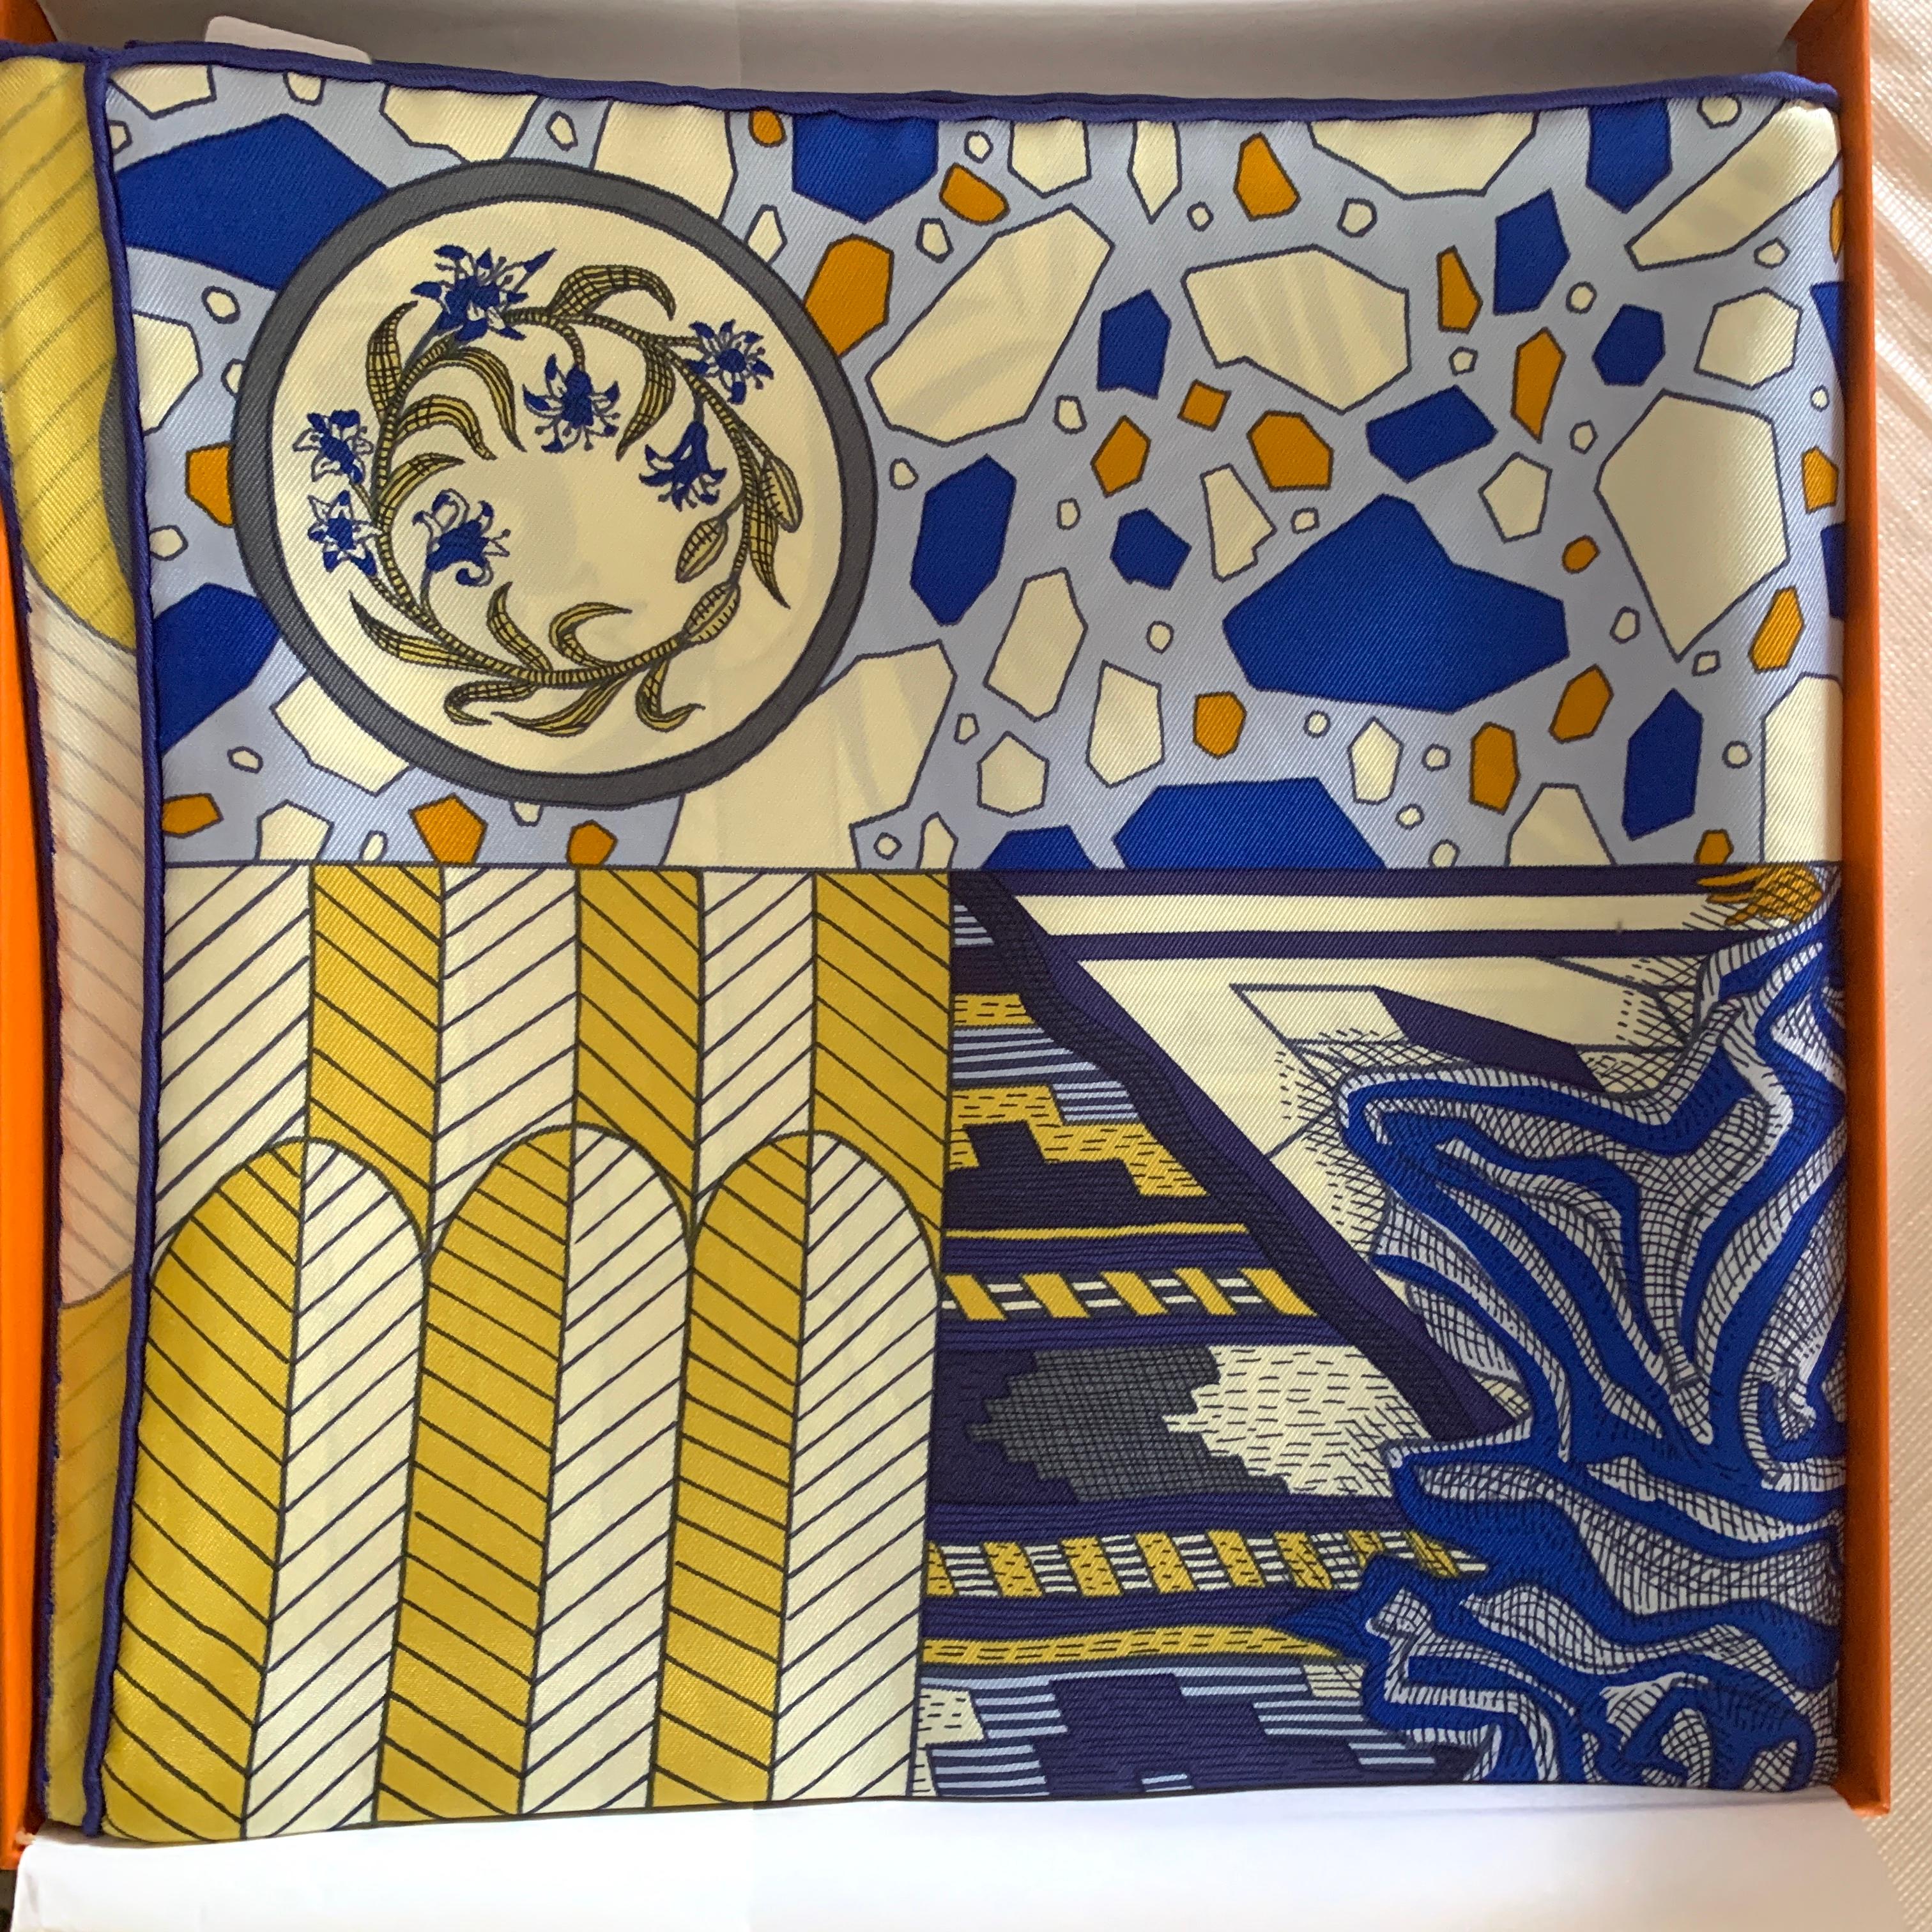 Hermes 90cm Silk Twill Scarf
La Dsanse ds Amazones Scarf
Blue and Yellow

 

Made in France

Designed by  Edouard Baribeaud

Measures 36